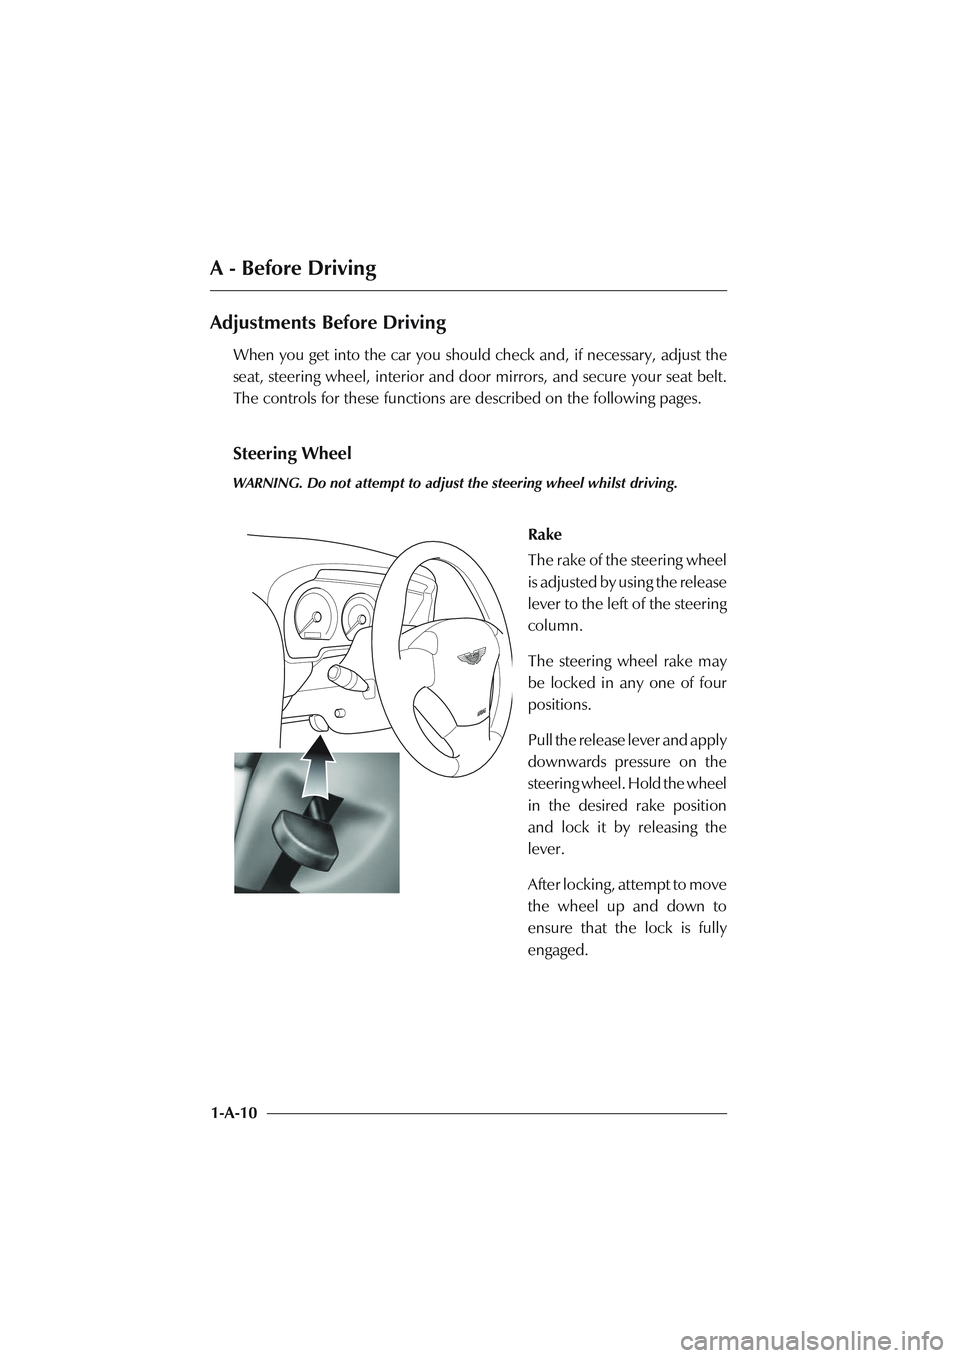 ASTON MARTIN DB AR1 Q 2003  Owners Guide A - Before Driving
1-A-10
Adjustments Before Driving
When you get into the car you should check and, if necessary, adjust the
seat, steering wheel, interior and door mirrors, and secure your seat belt